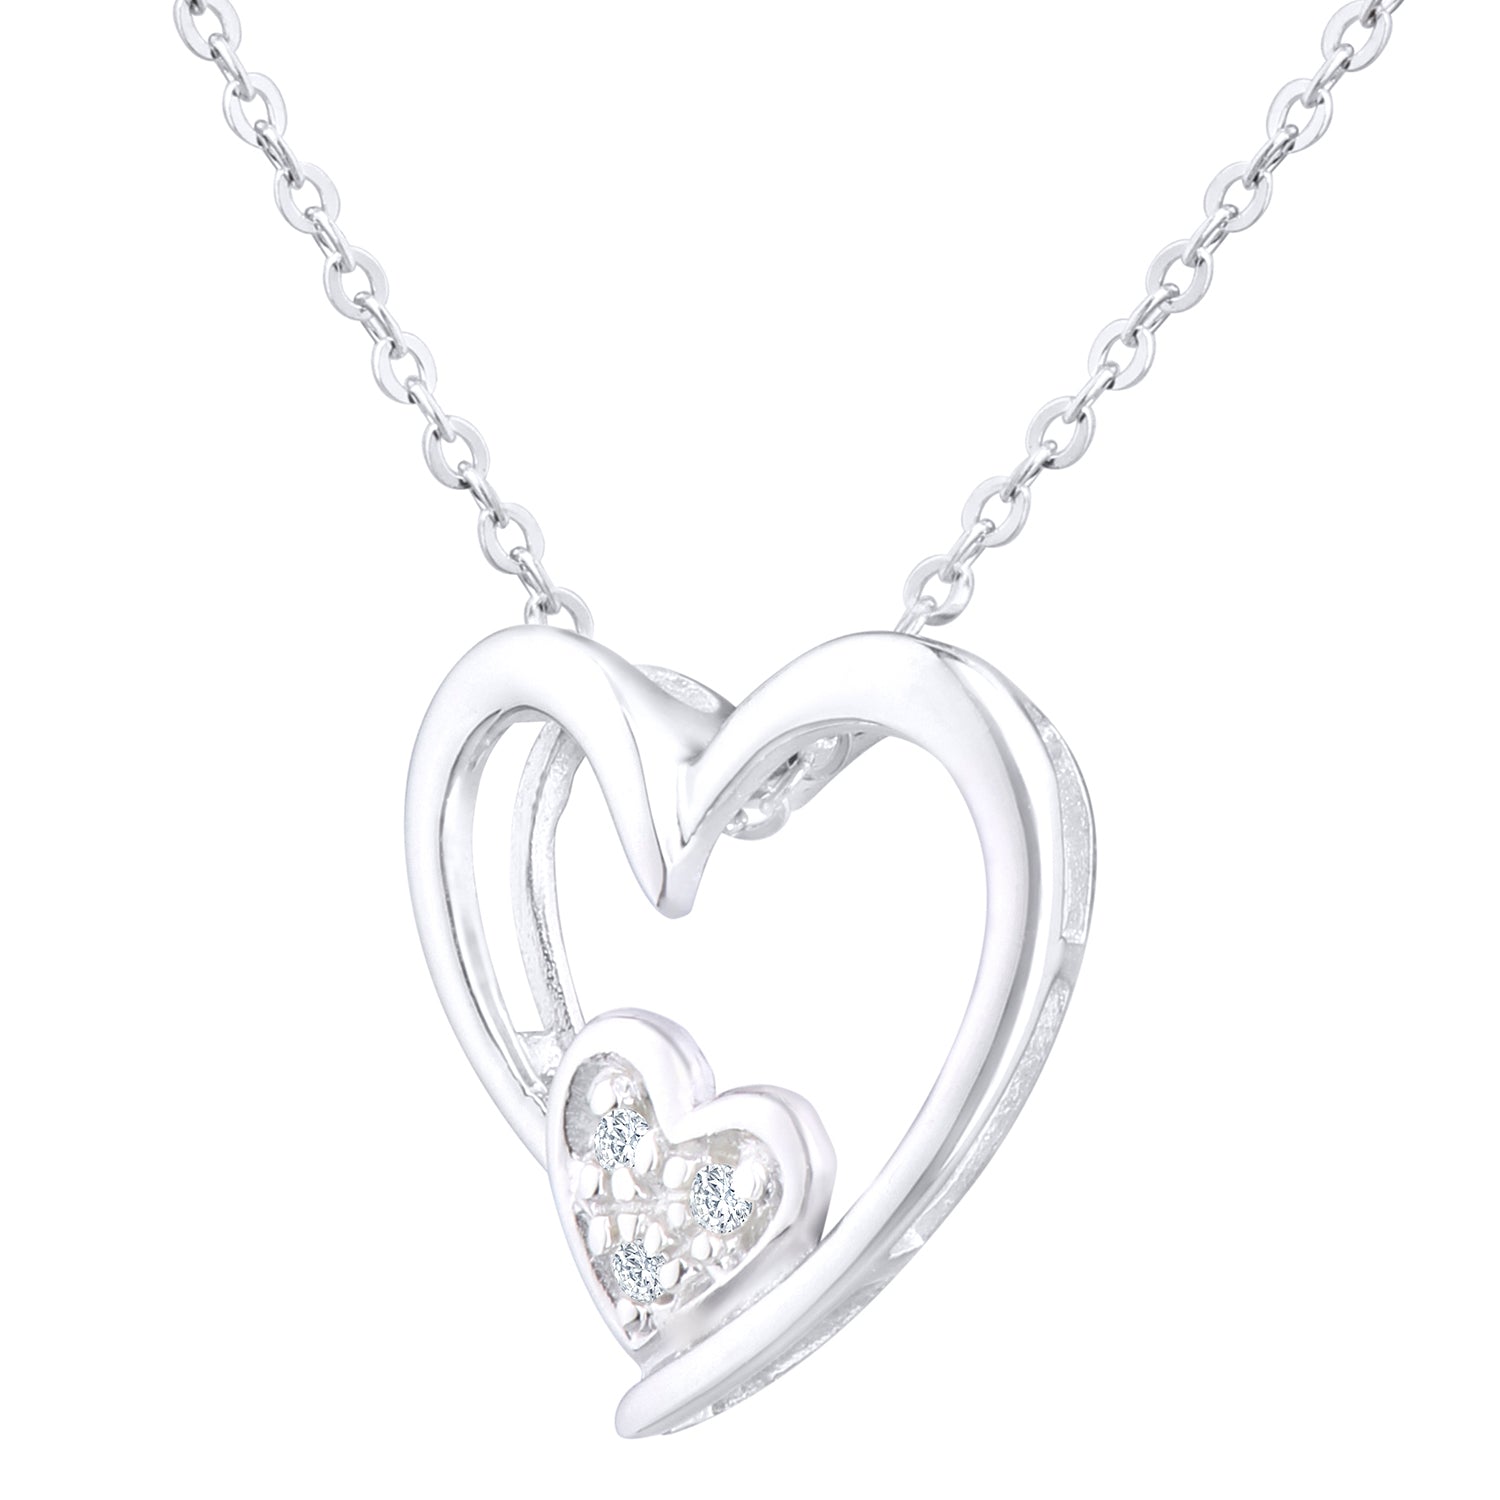 9ct White Gold  Round 1.5pts Diamond Heart Charm Necklace 18 inch - PP0AXL3110W